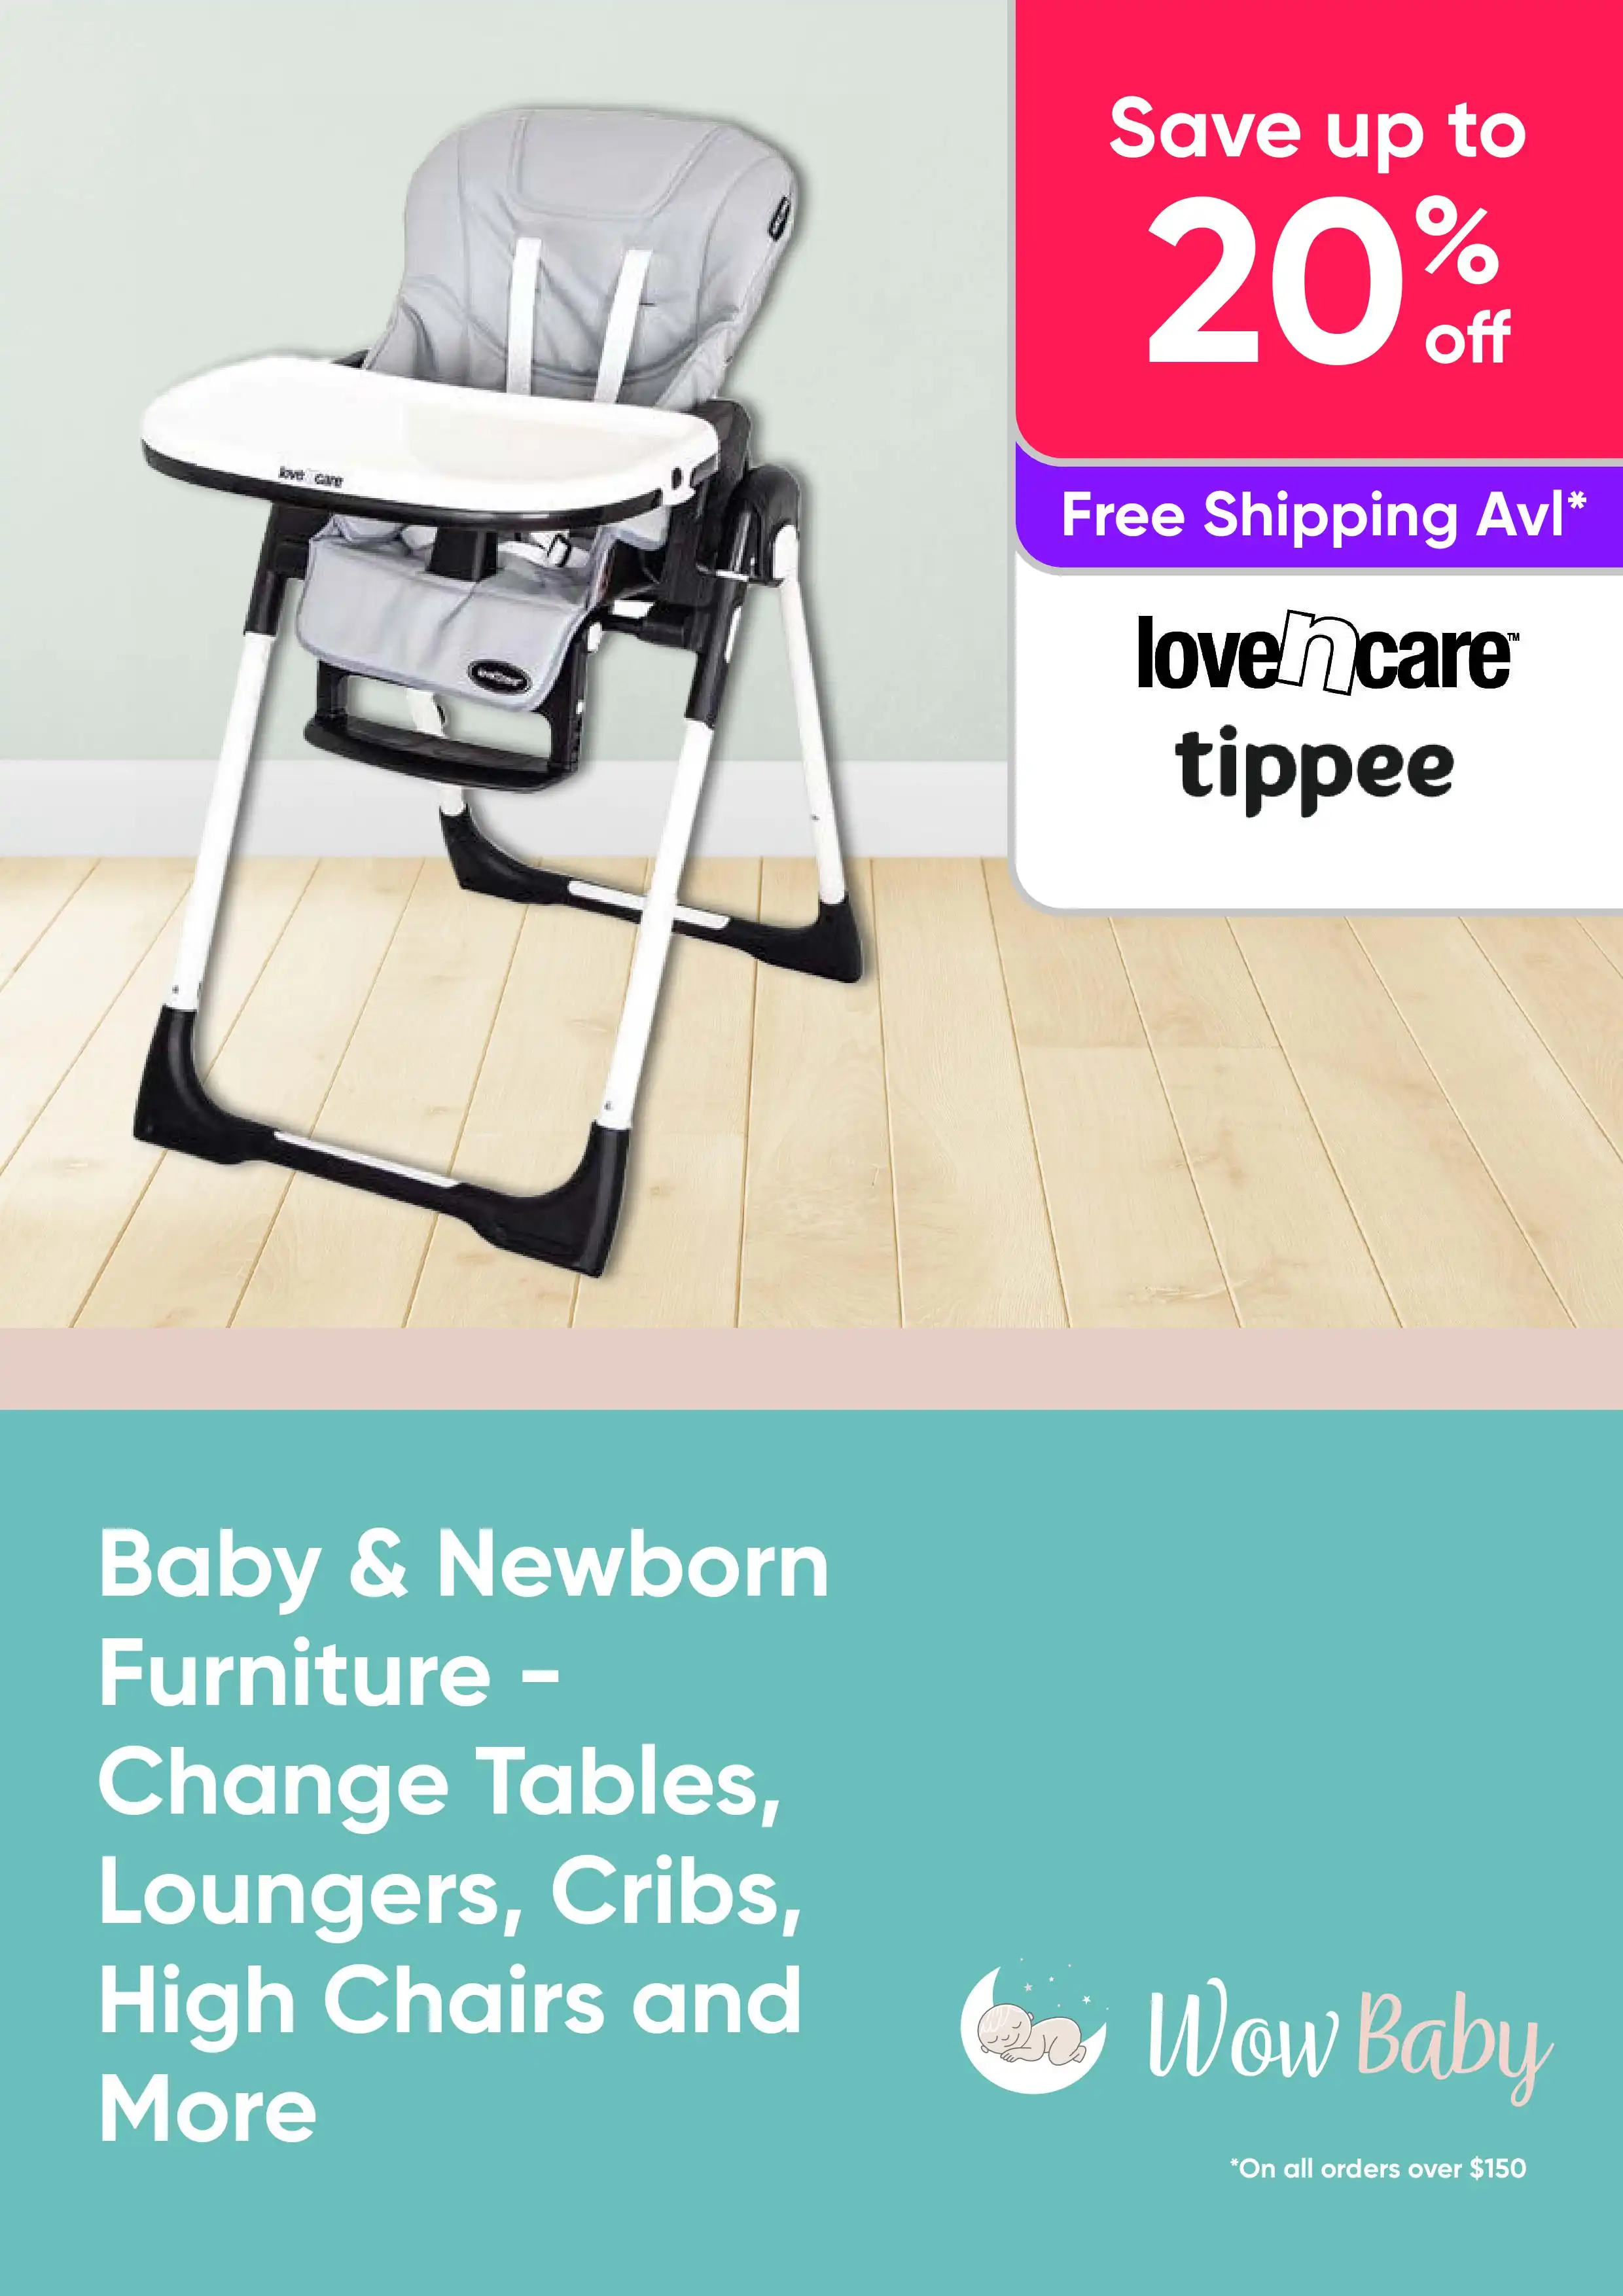 Baby & Newborn Furniture - Change Tables, Loungers, Cribs, High Chairs and More - Save up to 20% off